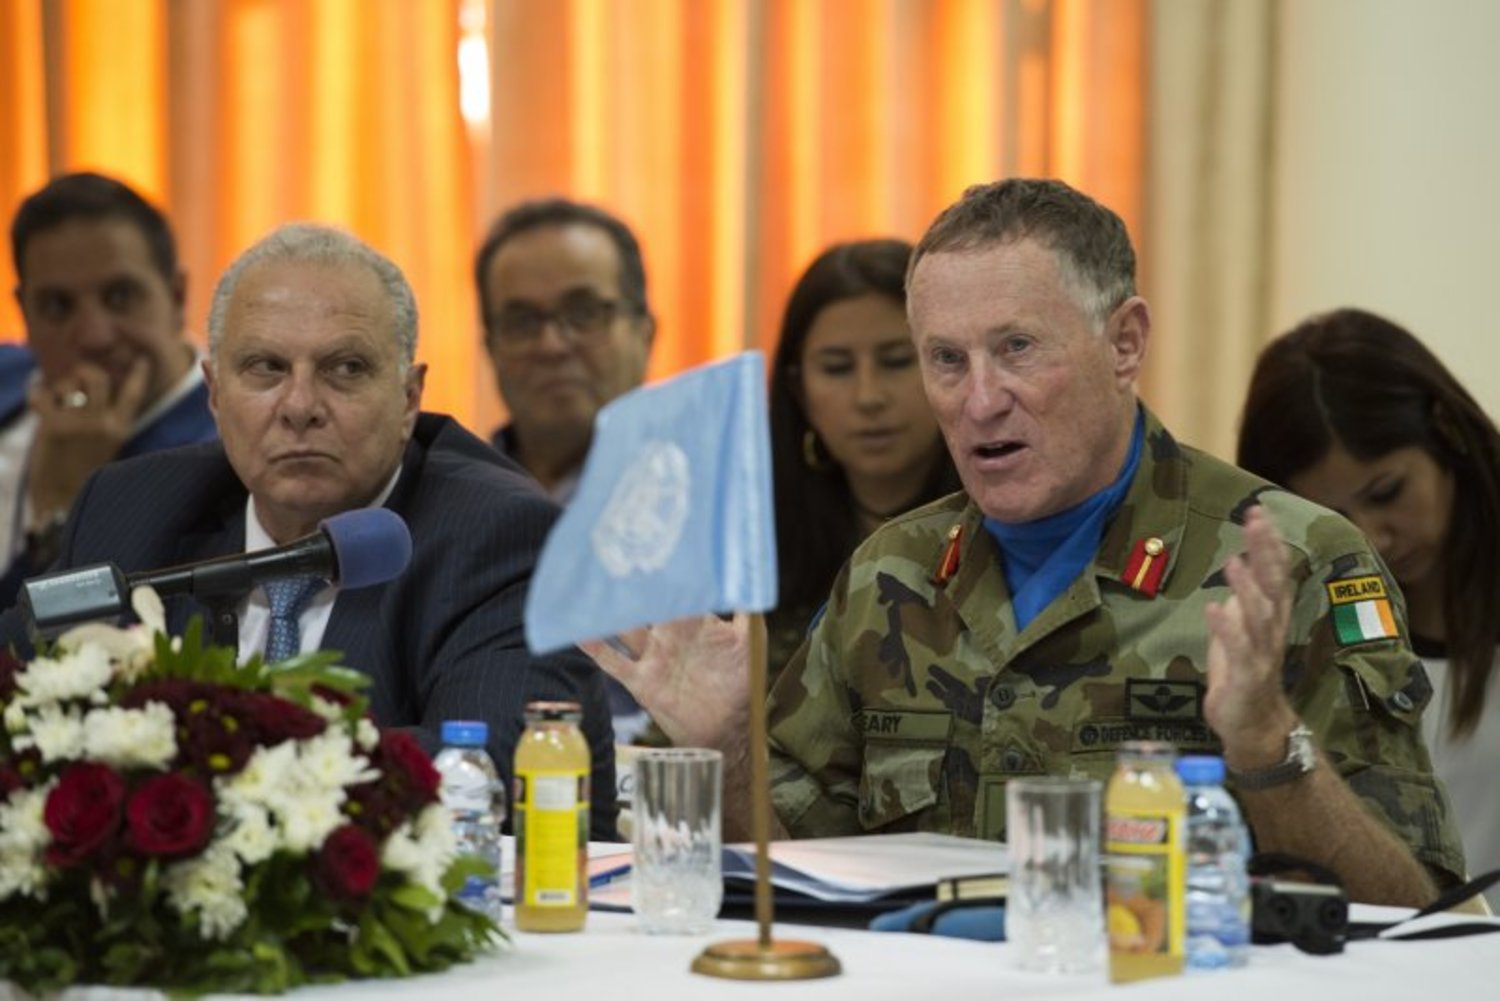 UNIFIL Head of Mission and Force Commander Major General Michael Beary. UNIFIL photo